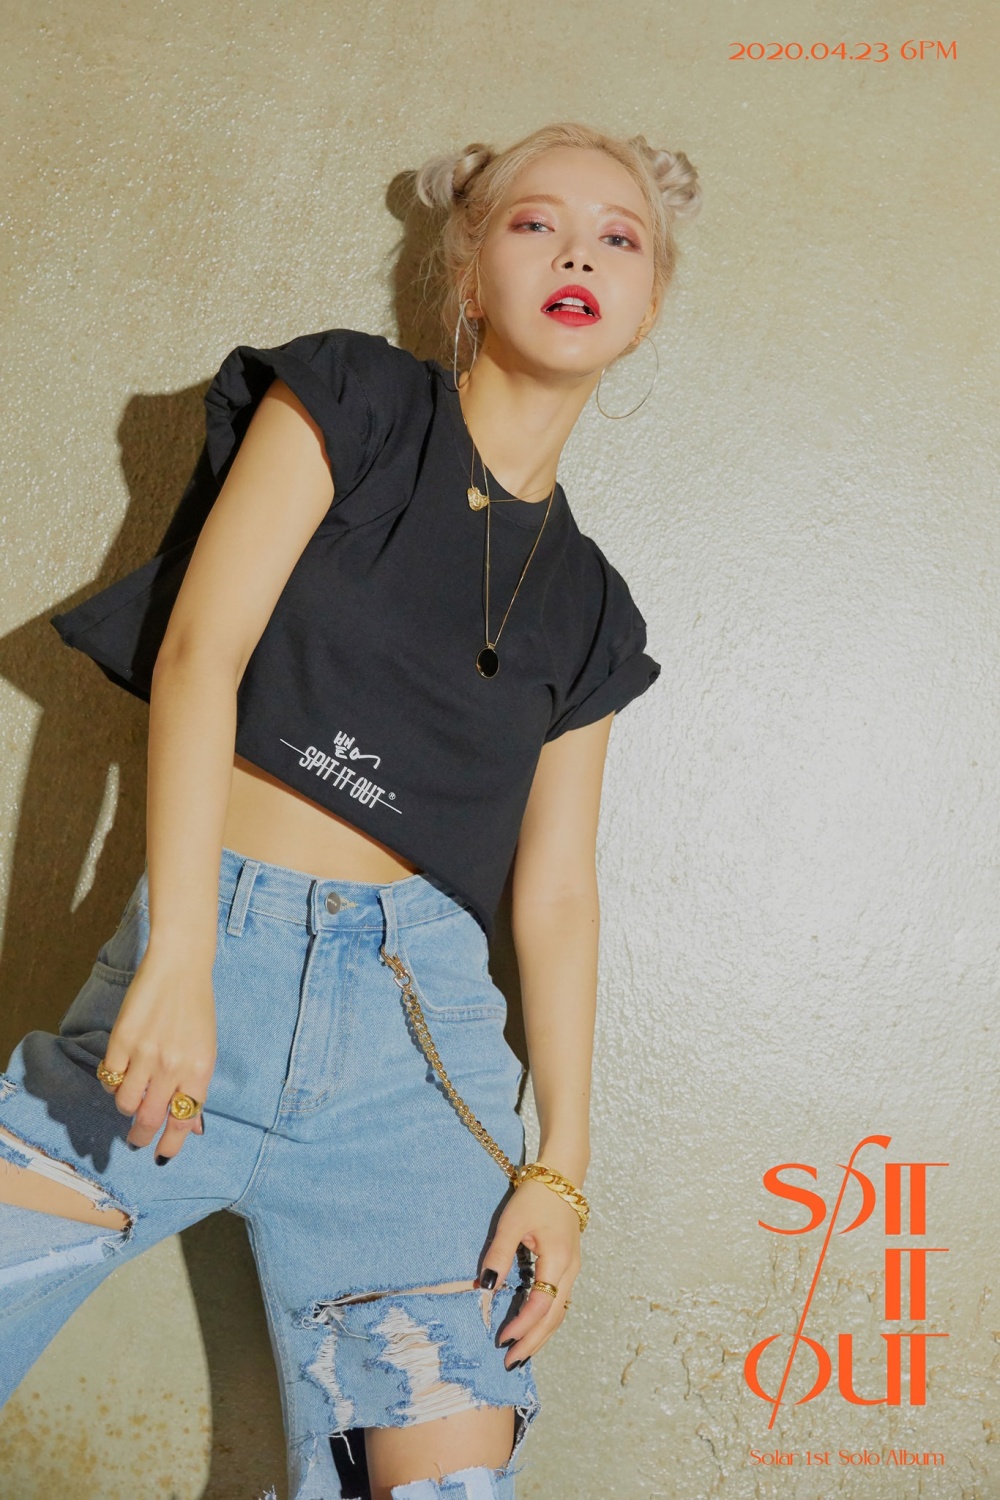 WATCH: MAMAMOO's Solar is Cool and Edgy in "SPIT IT OUT" Teasers